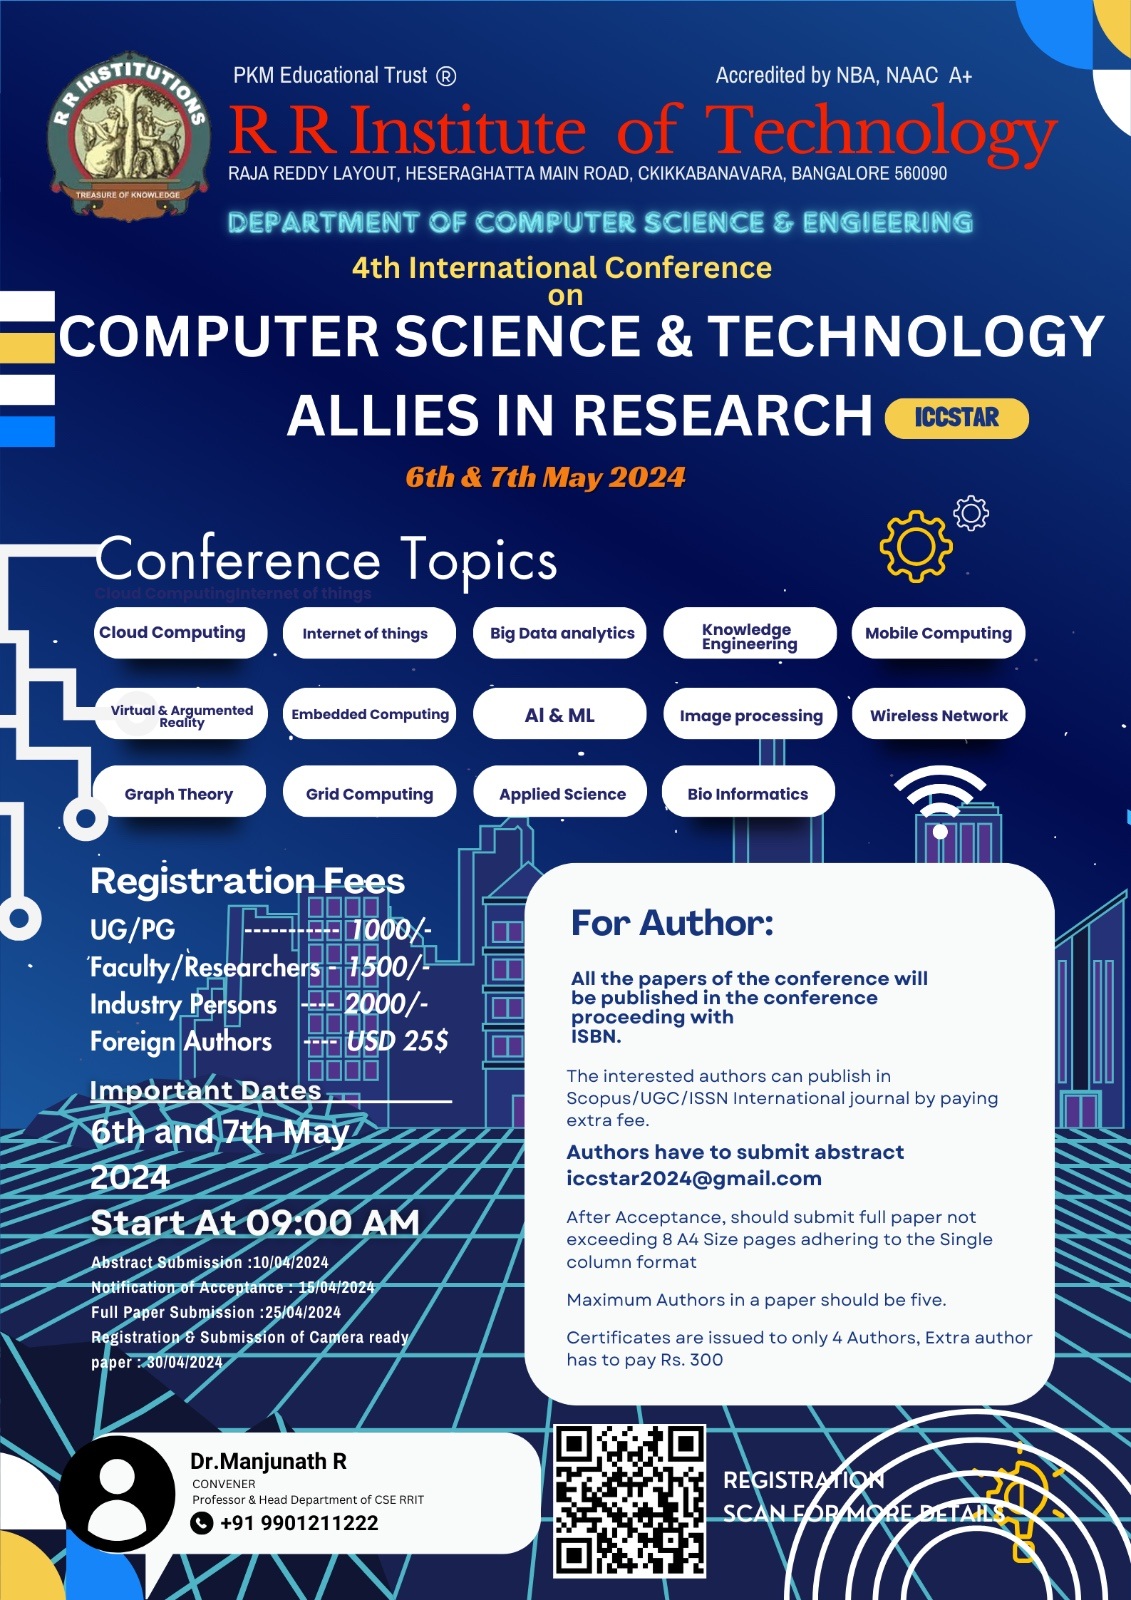 Department of CSE, RRIT is Organising a International Conference on “Computer Science & Technology Allies in Research” on 5th & 6th May 2024